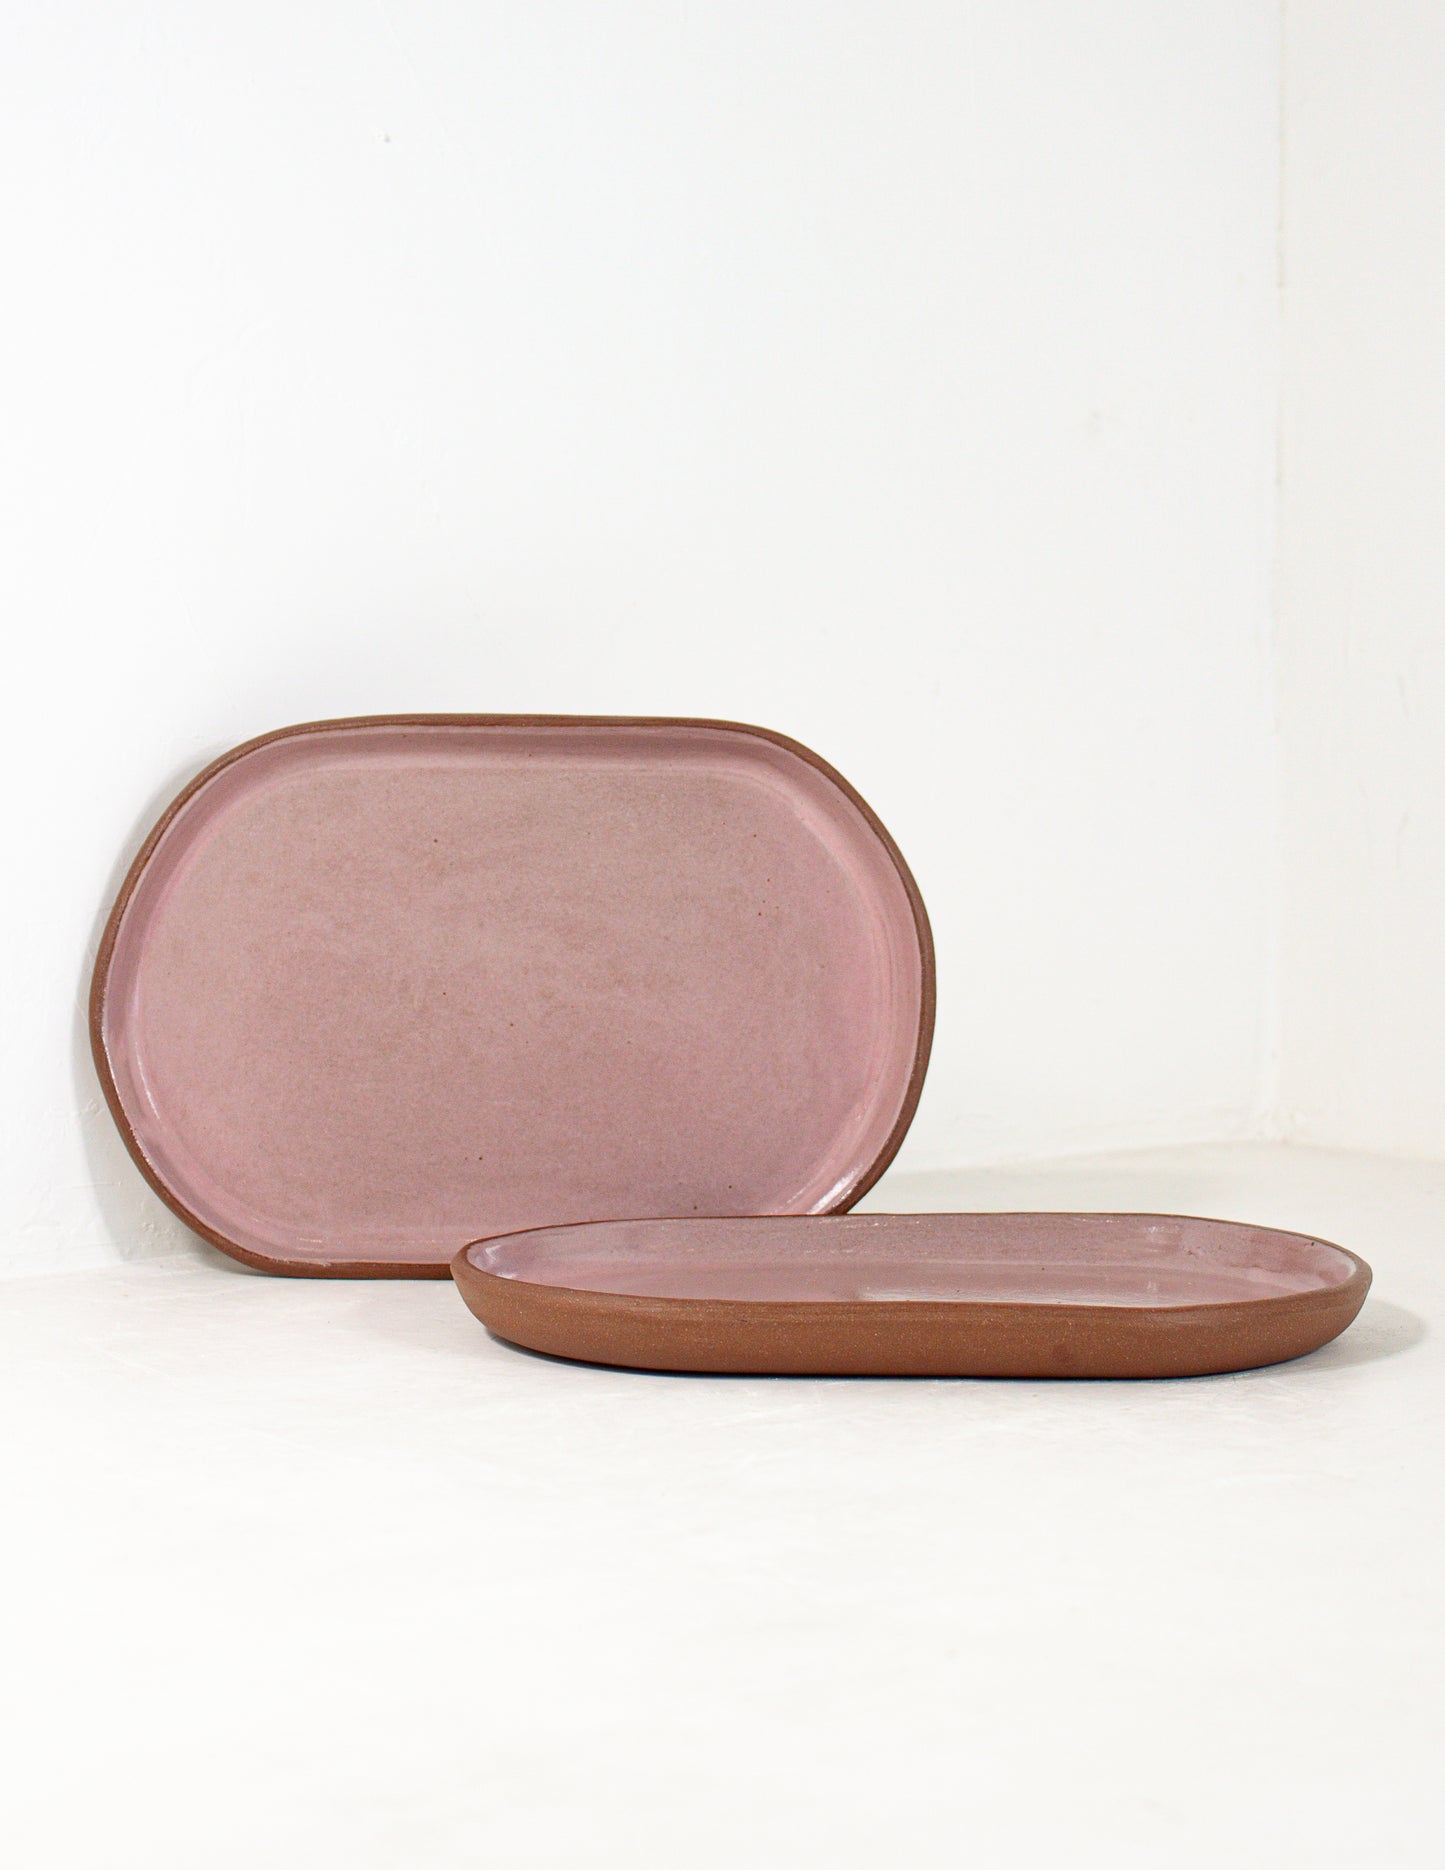 Small handmade serving platter with modern straight-sided form